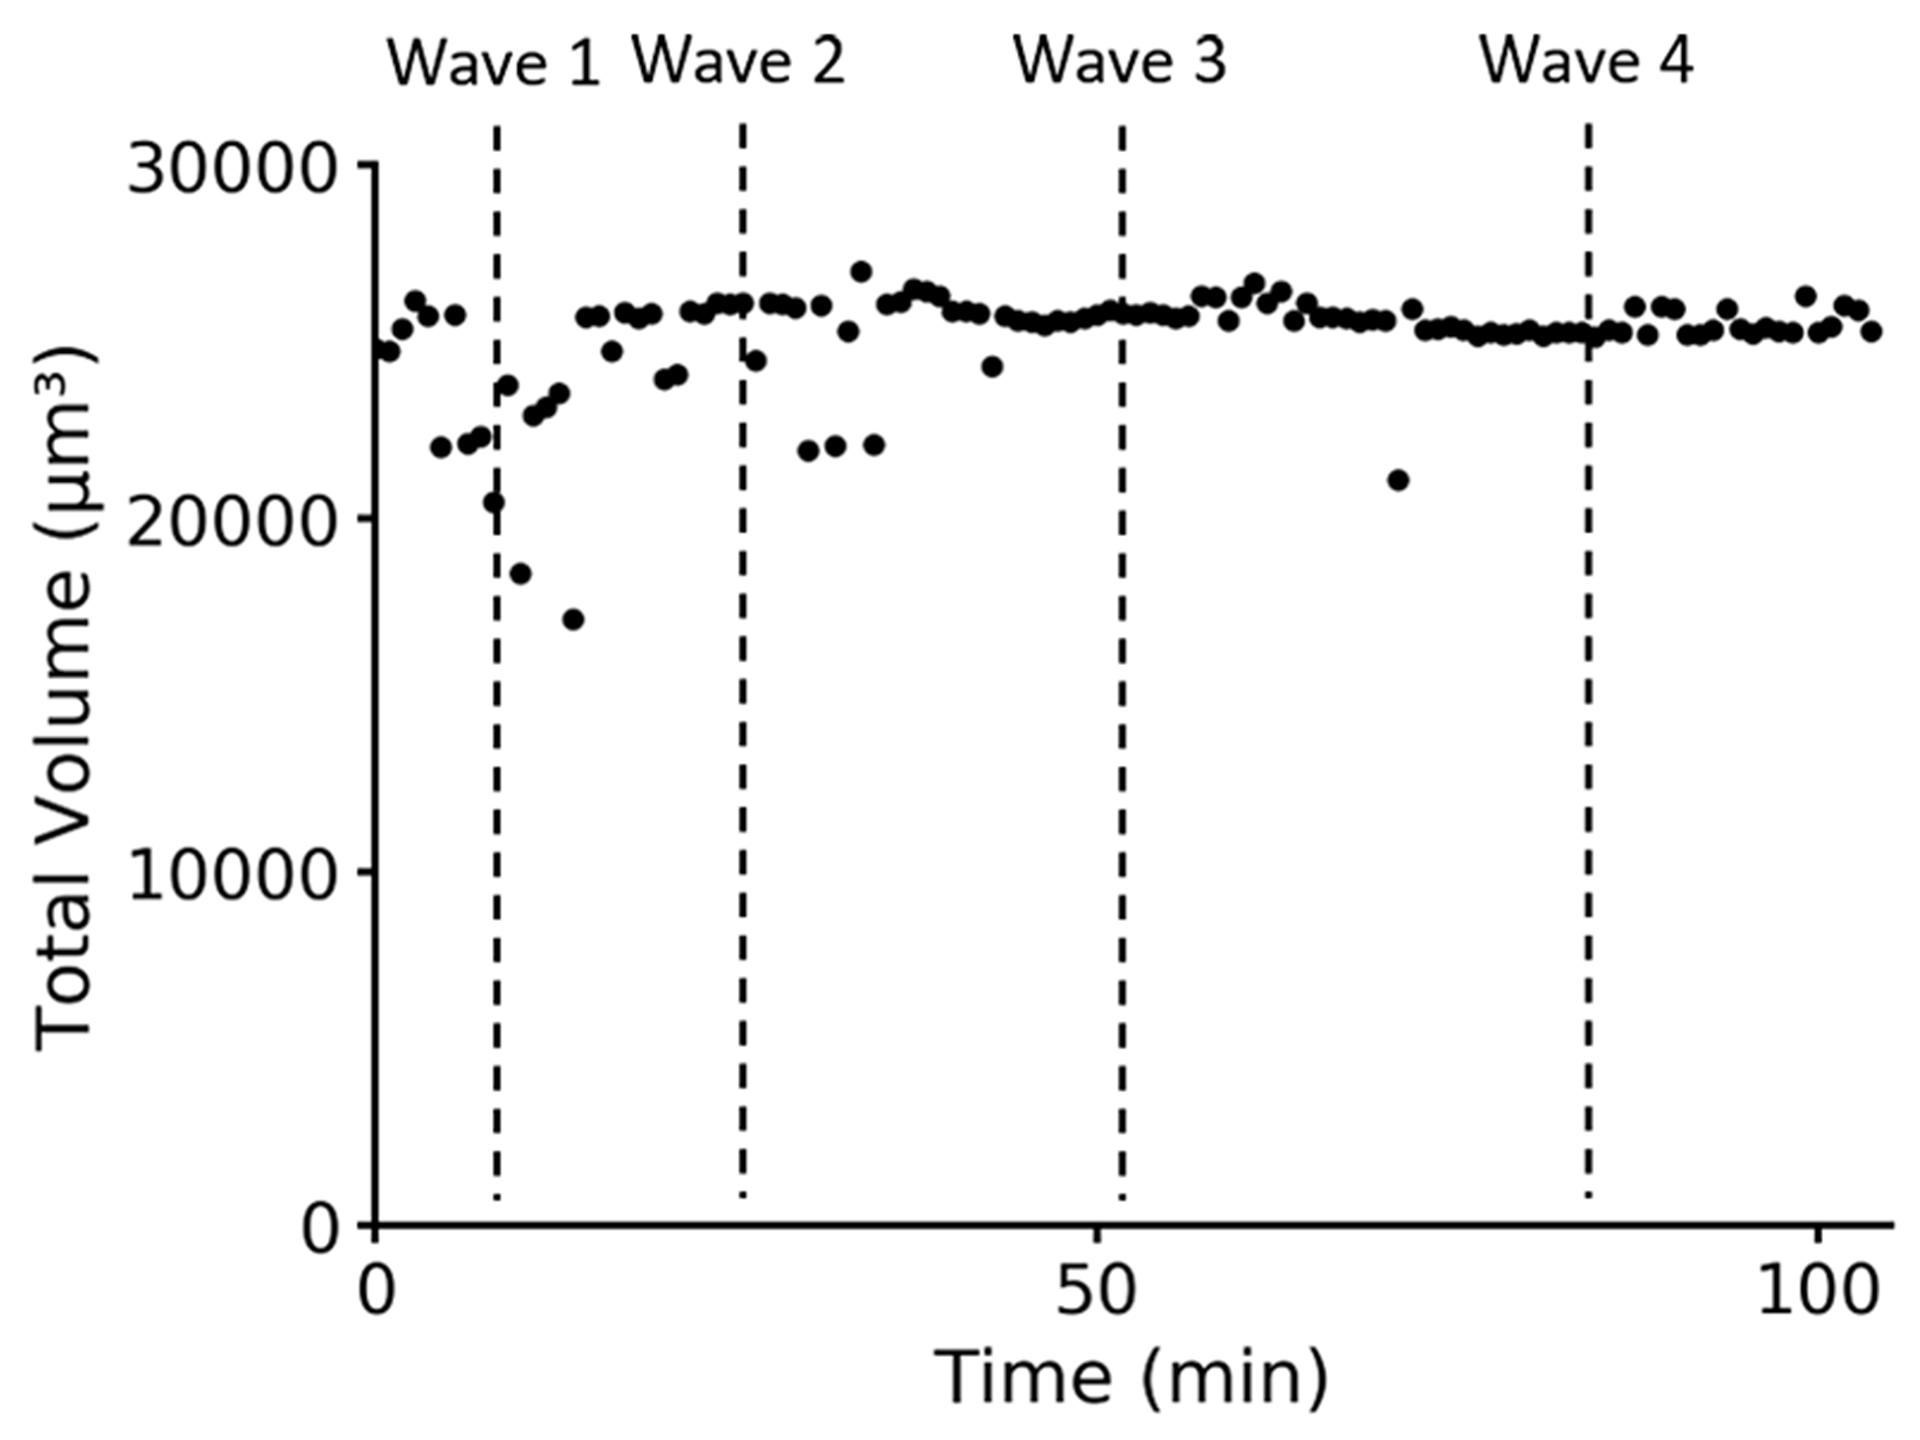 Figure 5A: Total embryo volume. Cell compartment volumes summed for each time point. Vertical lines indicate peak mitotic waves.